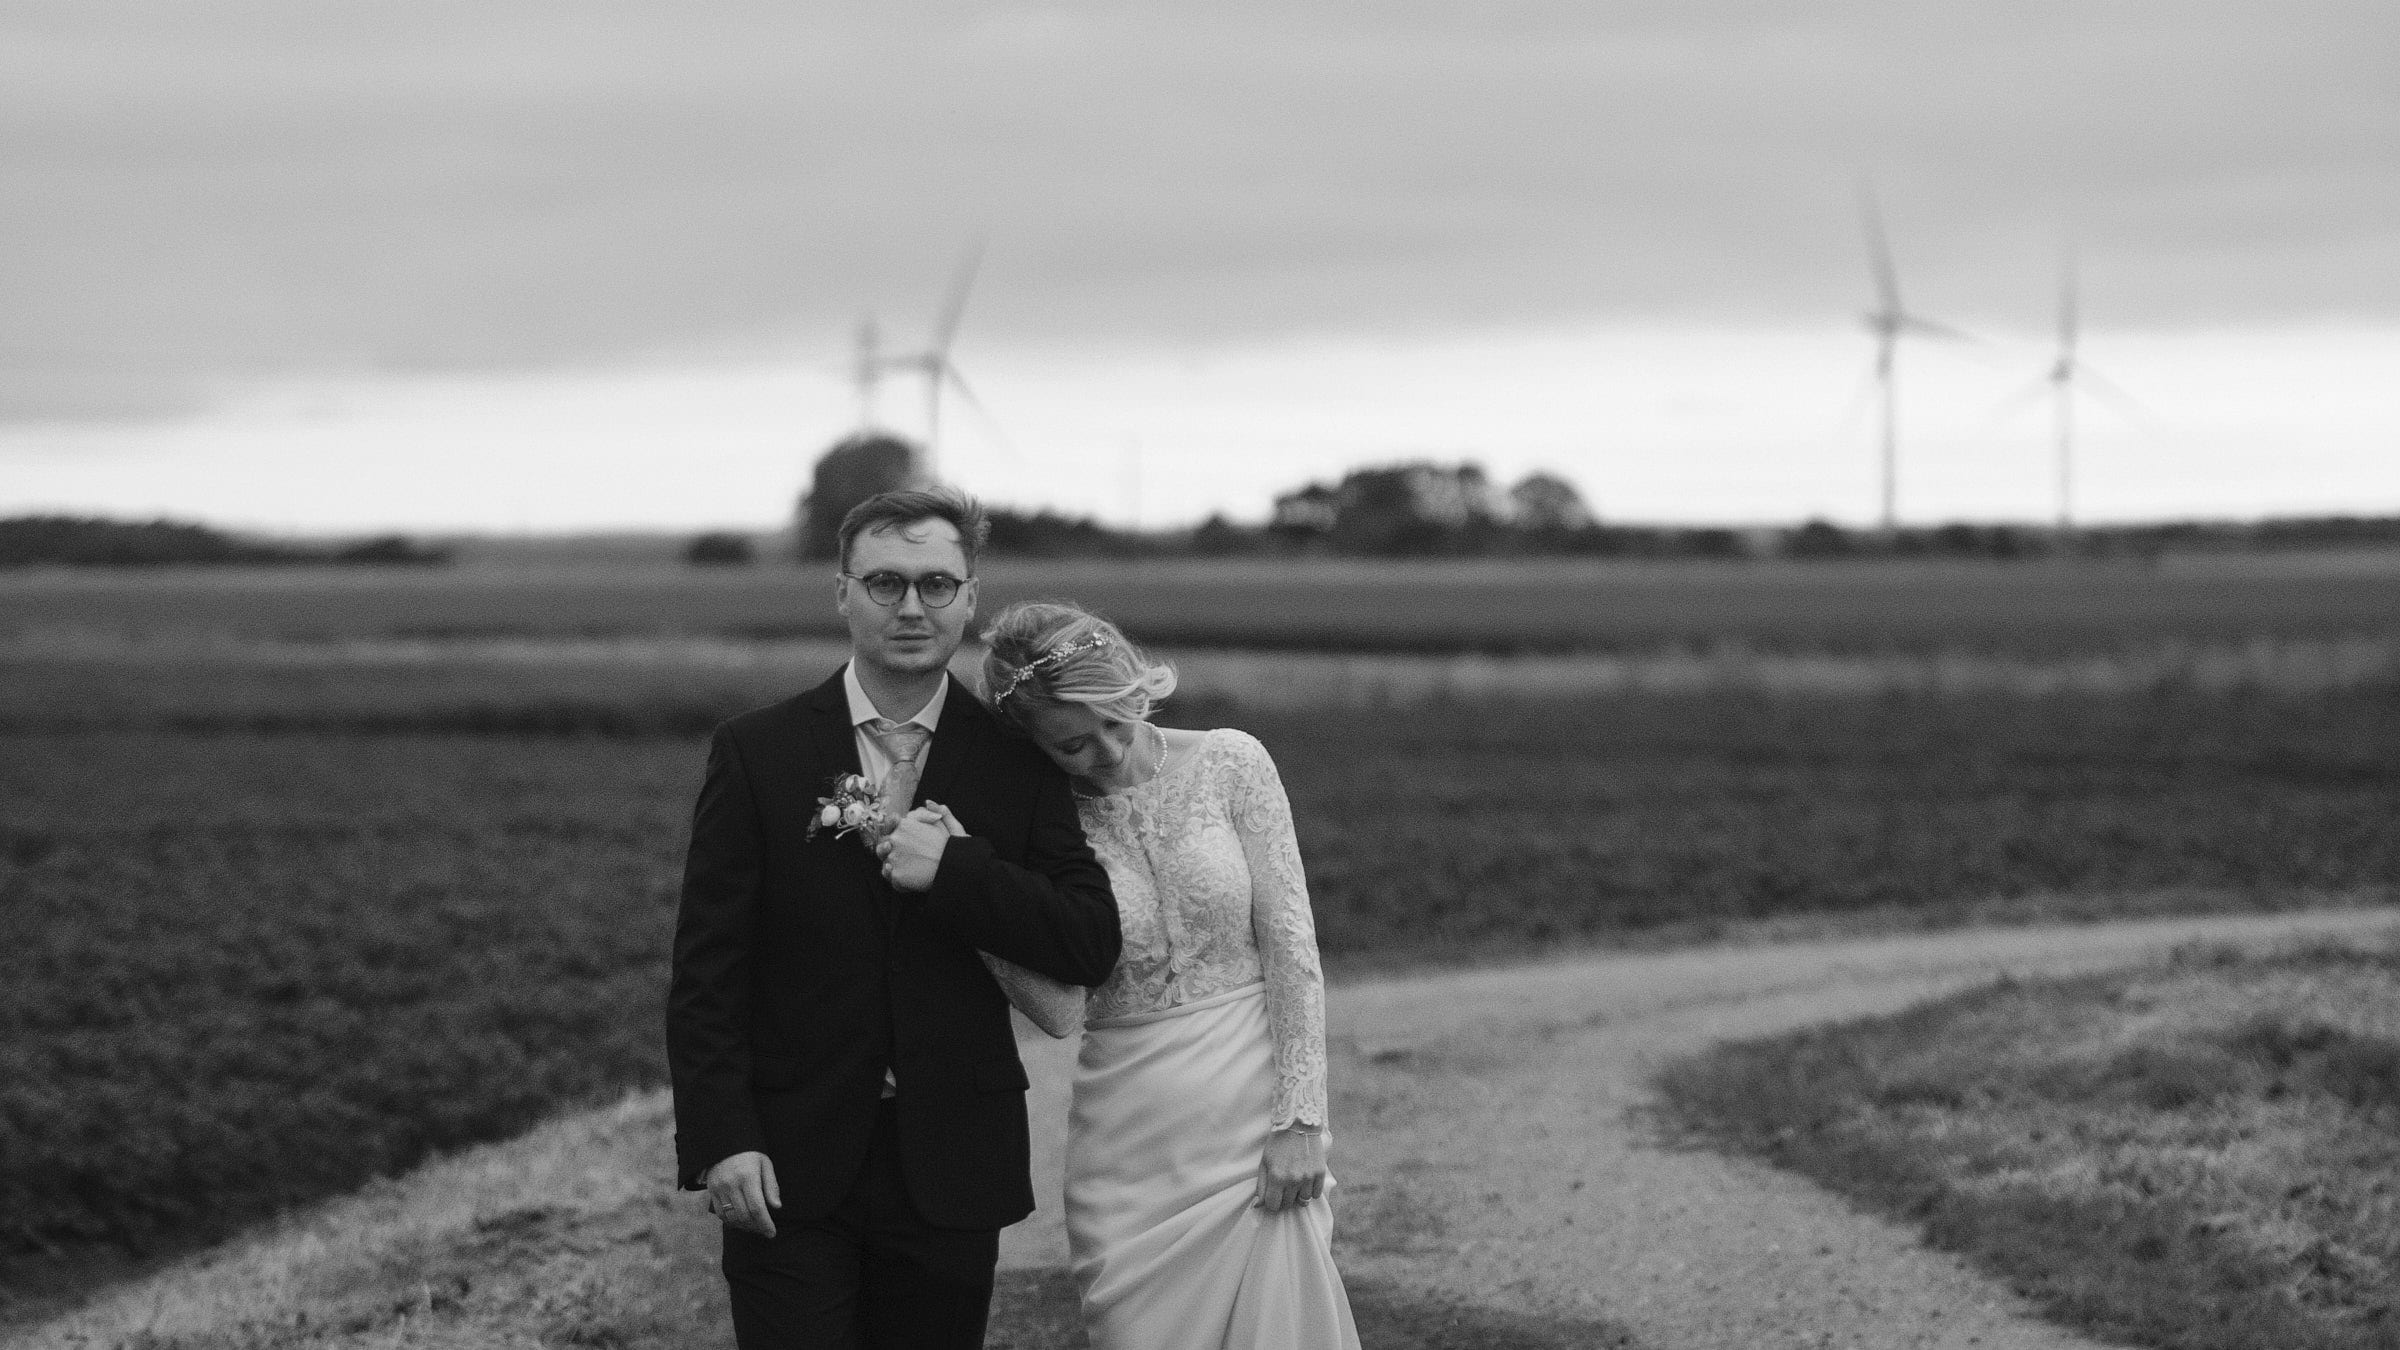 A black and white photo of a couple embracing against a Lincolnshire Countryside backdrop on their wedding day